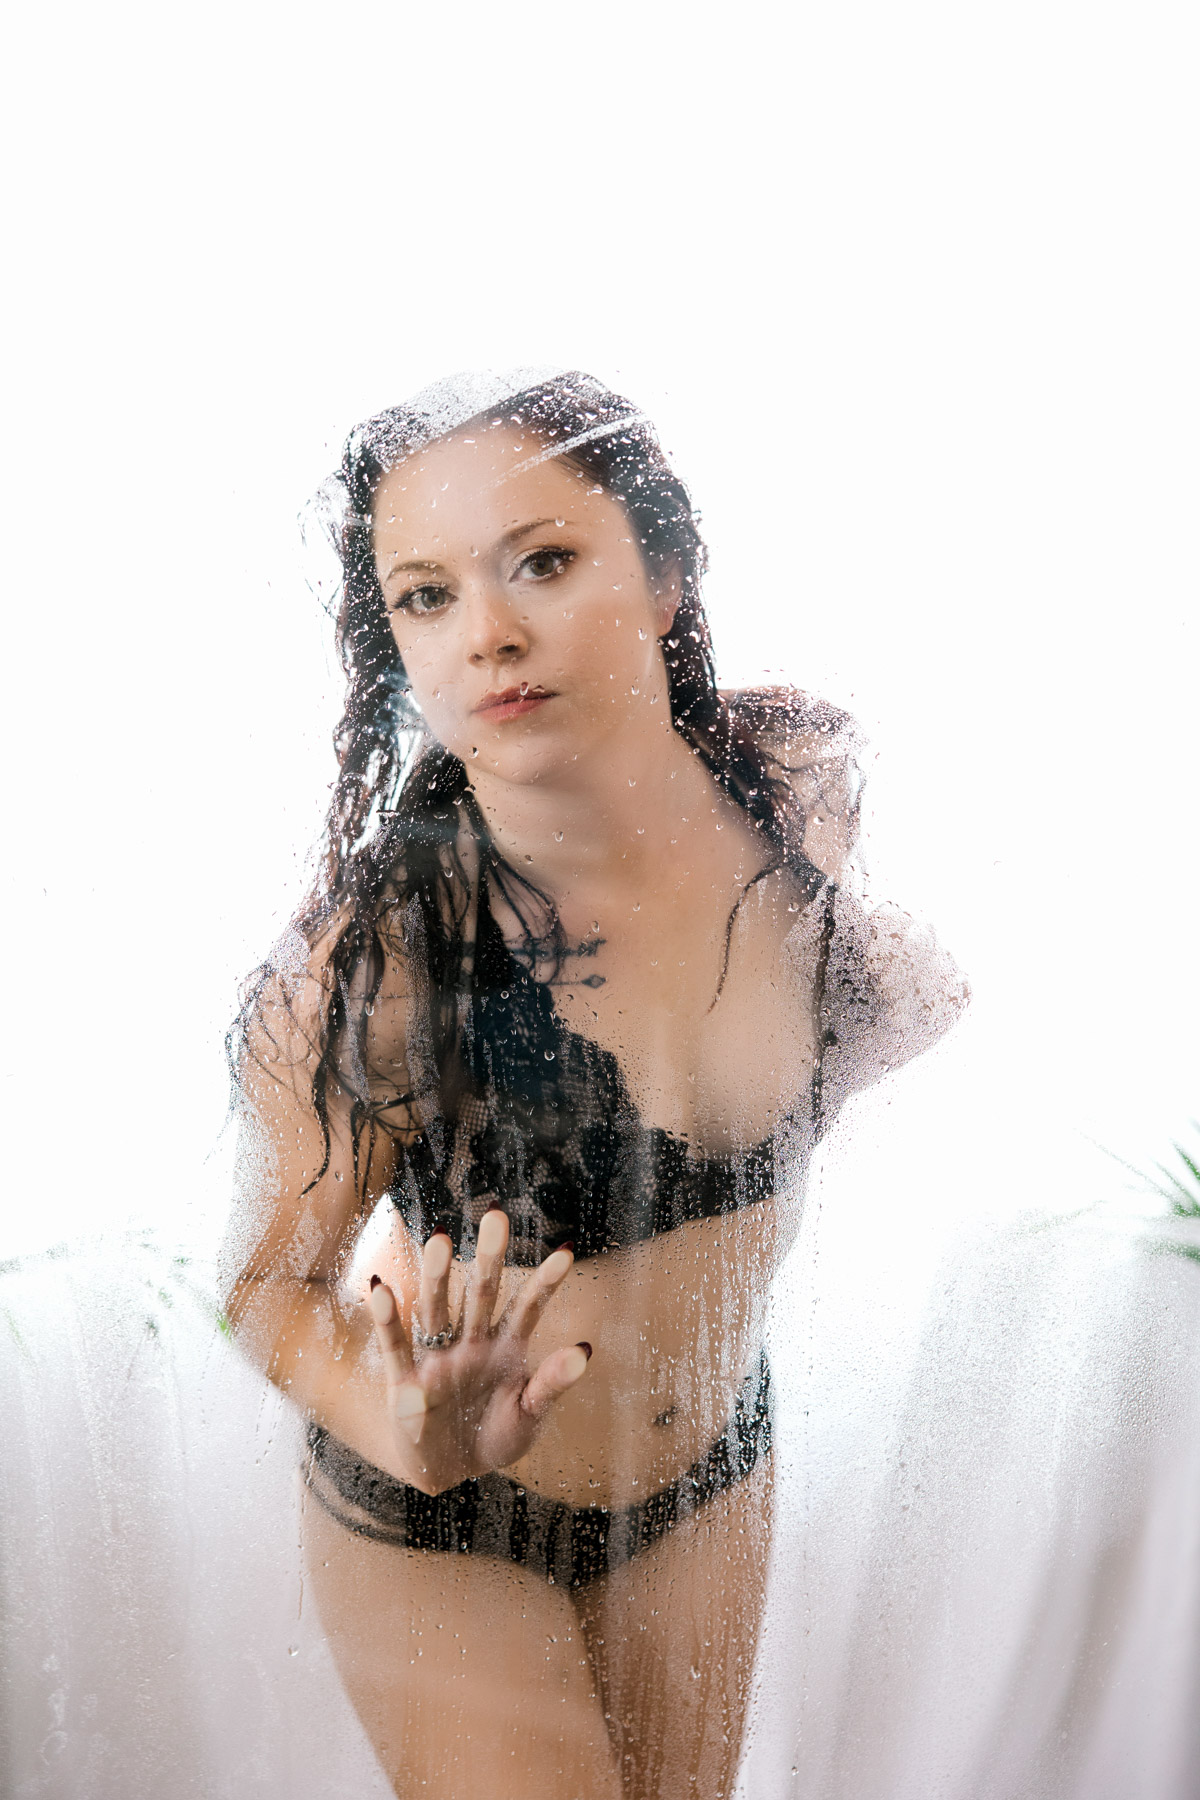 Woman looking out of the shower glass wearing black bra and panties